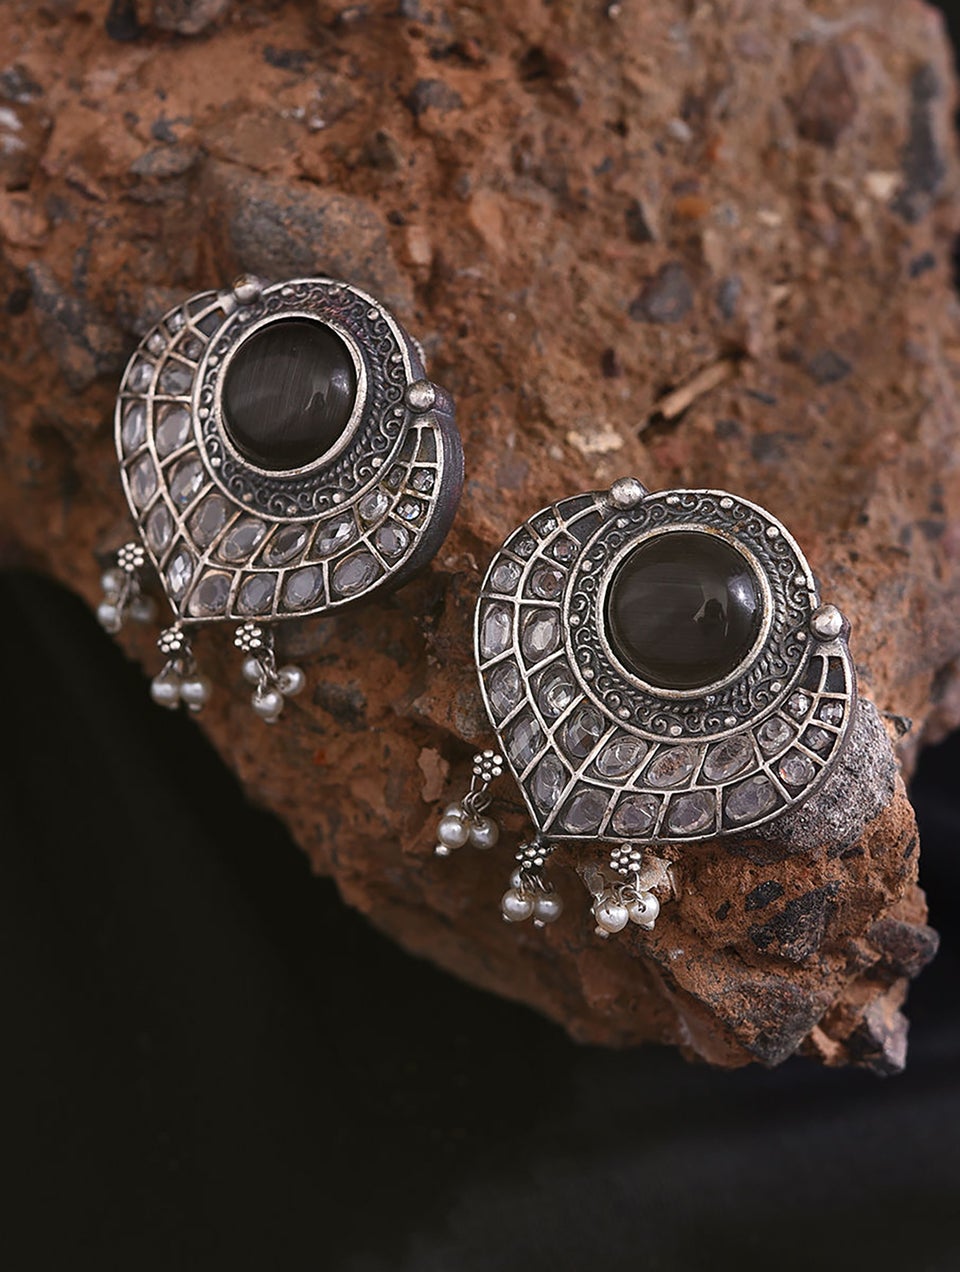 Women Black Silver Tone Tribal Necklace With Earrings